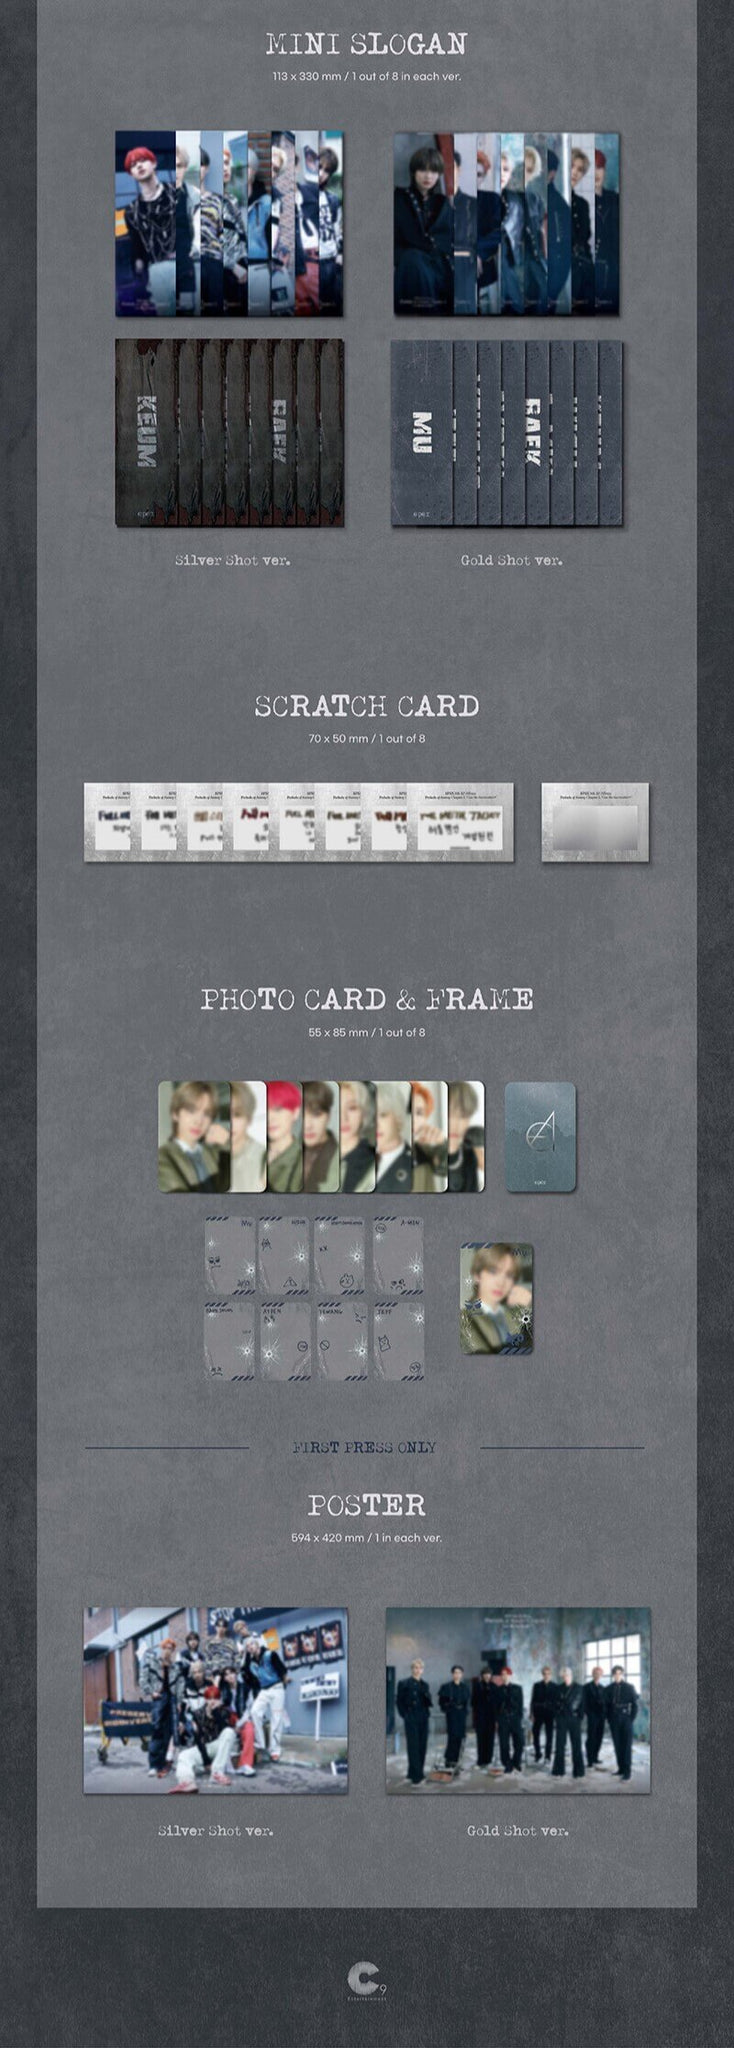 EPEX Prelude of Anxiety Chapter 2. Can We Surrender? Inclusions Mini Slogan Scratch Card Photocard & Frame 1st Press Only Poster